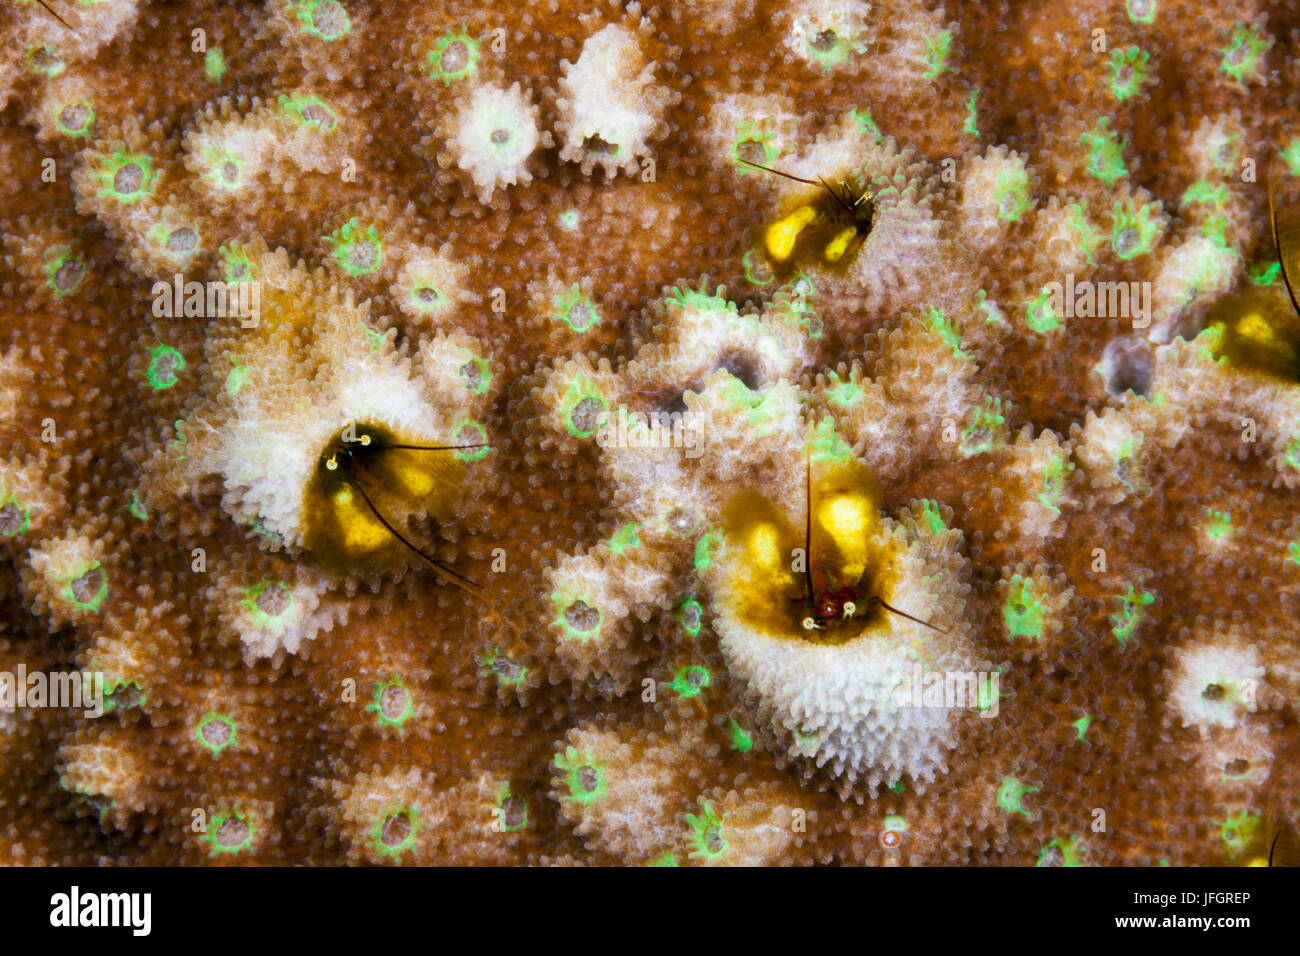 Coral hermit crabs, Paguritta sp., Russell islands, the Solomon Islands Stock Photo